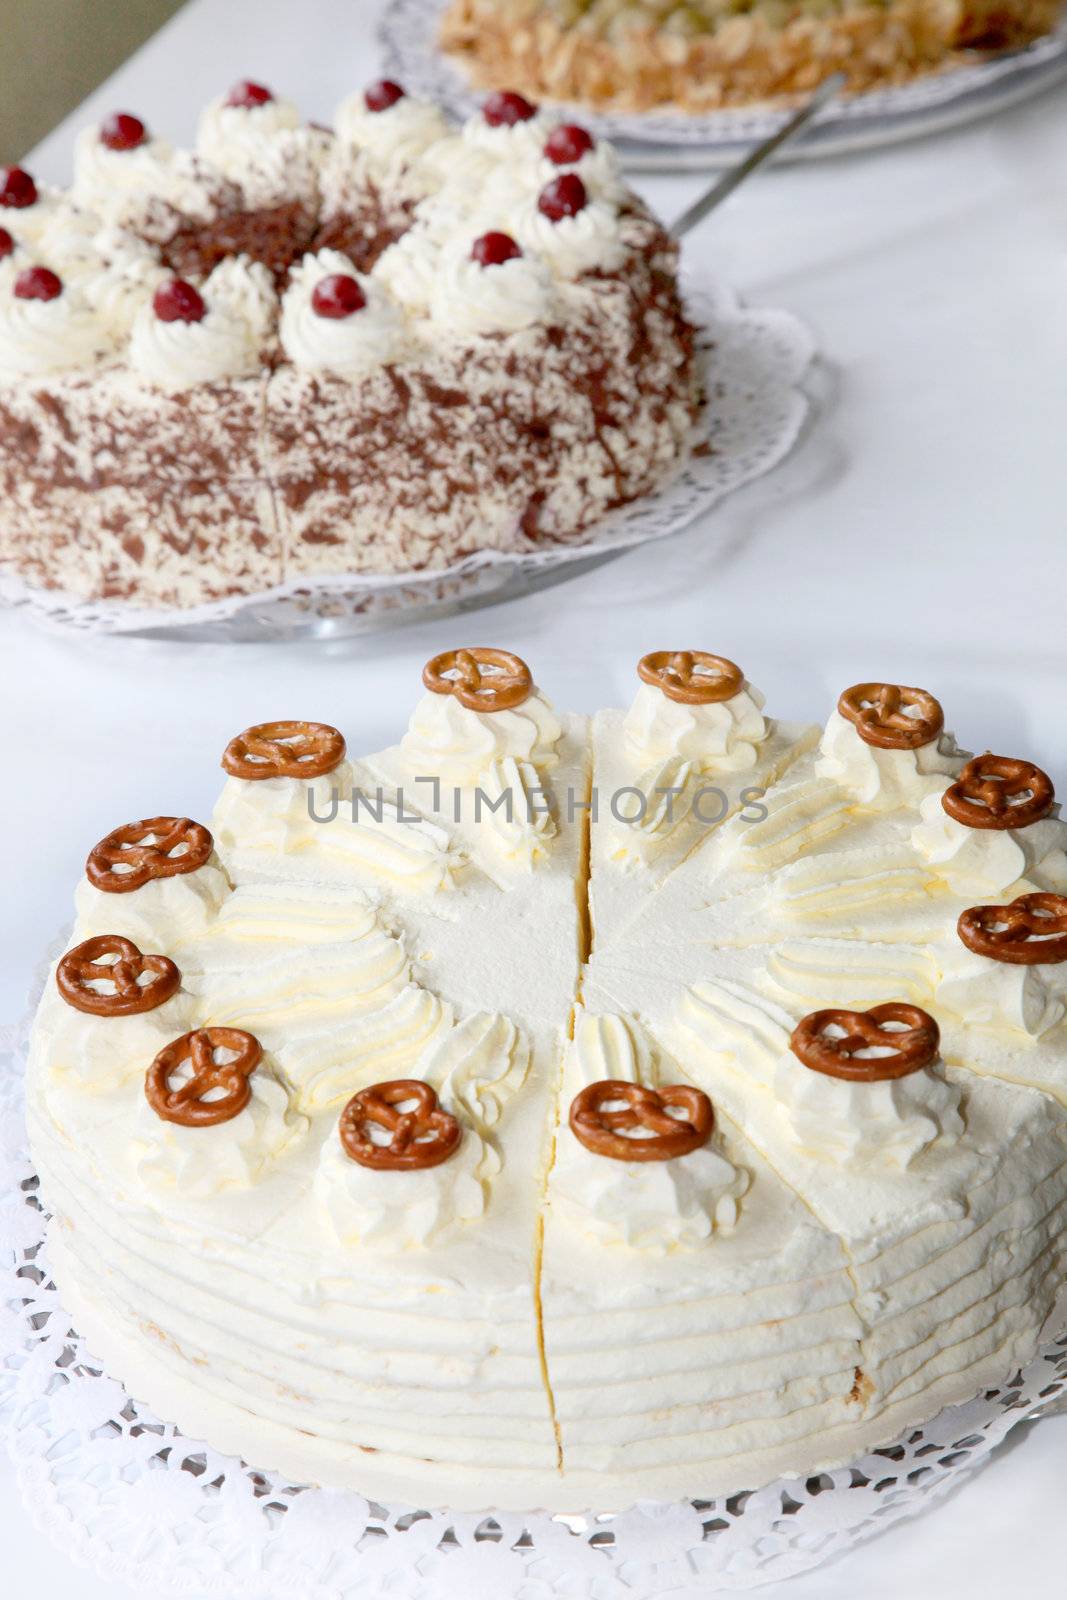 Cake buffet with different cakes. A cream pie is seen in the foreground